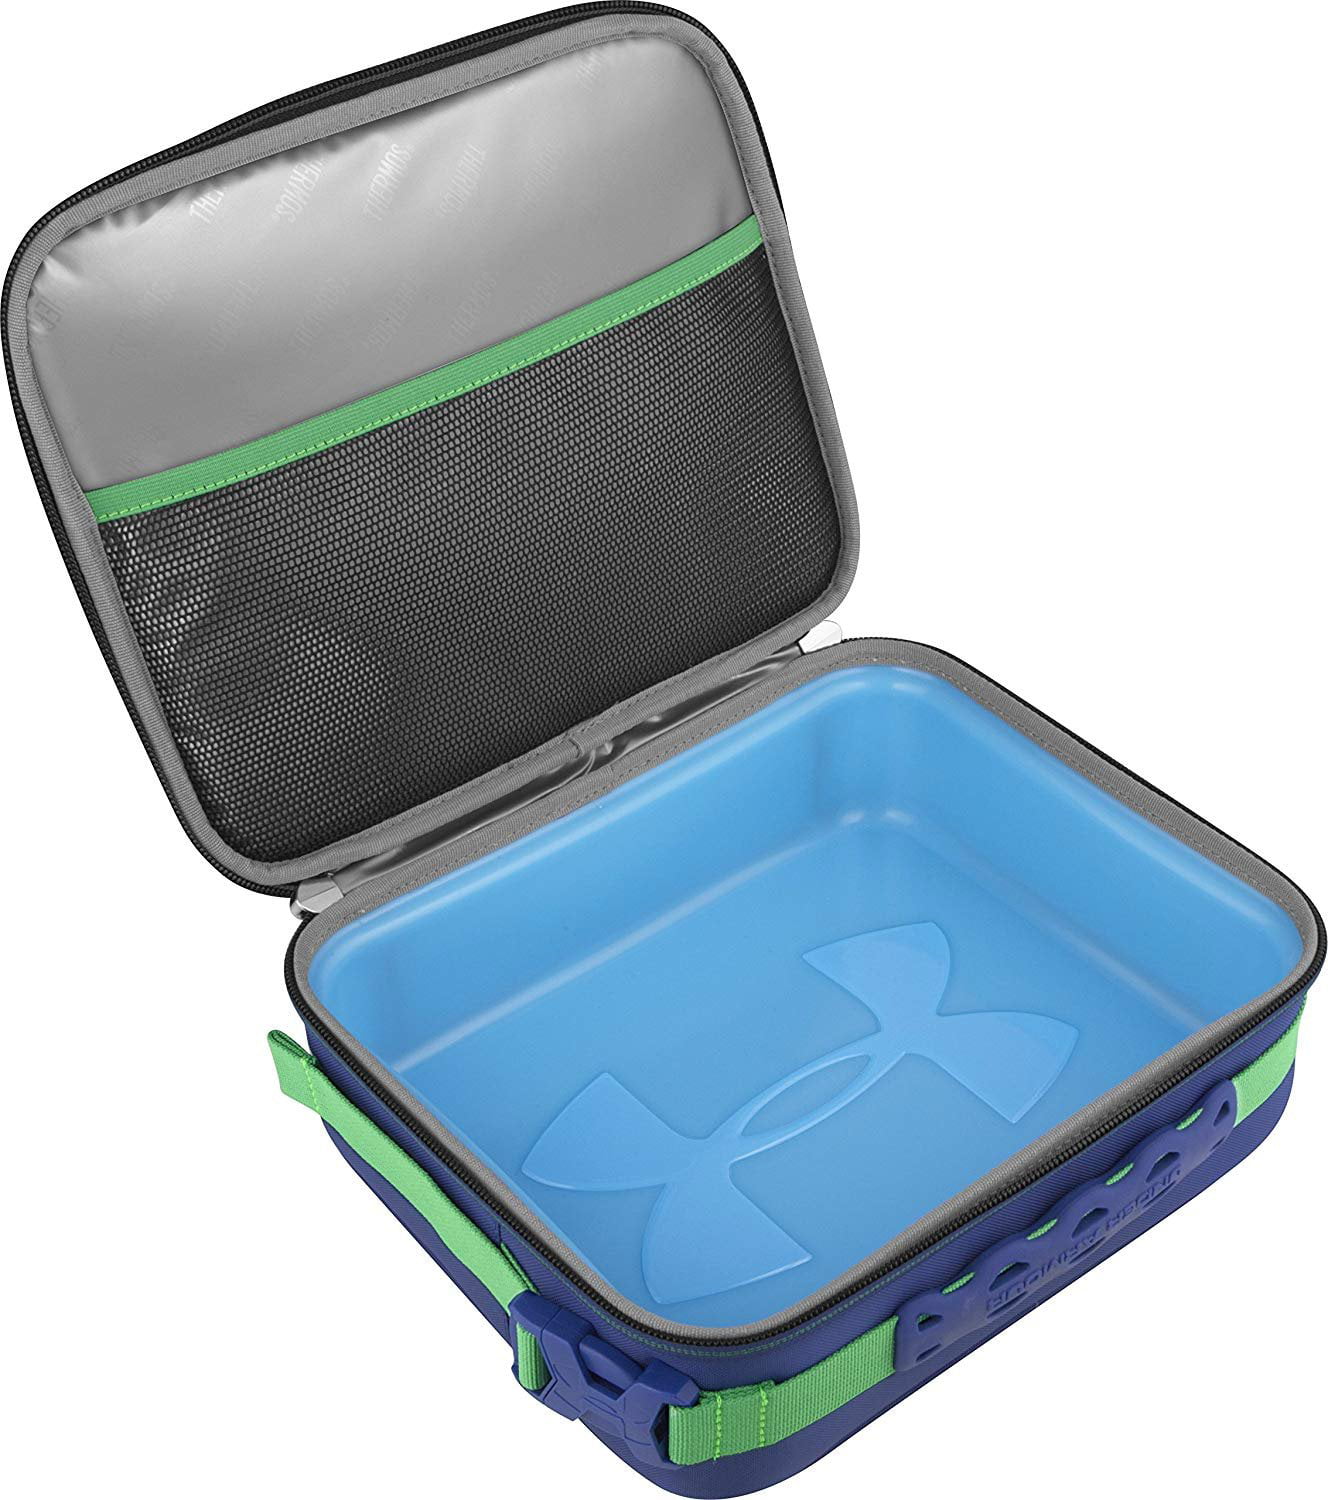 Under Armour under armor lunch box Blue - $8 (82% Off Retail) - From Kaitlyn